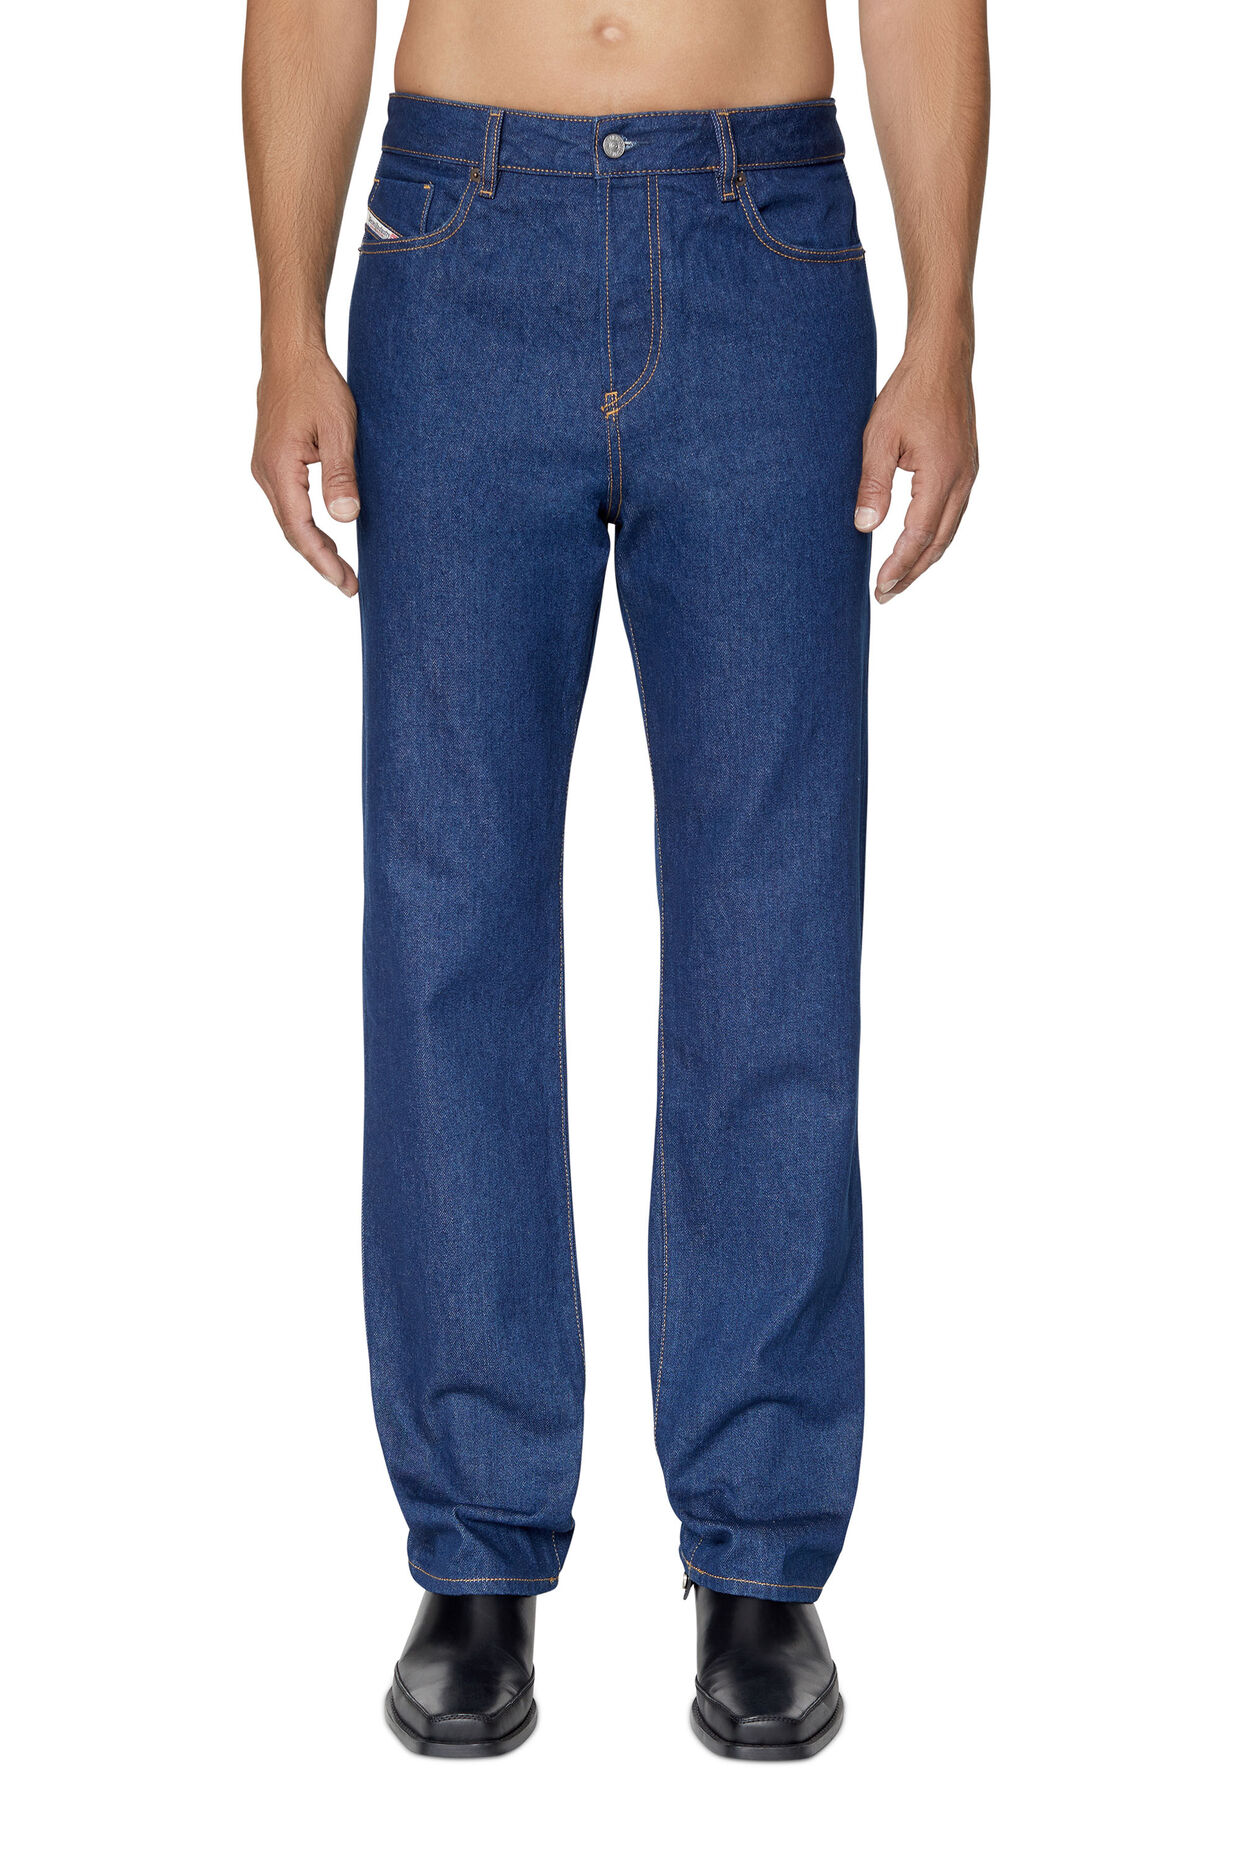 diesel.com | 1955 007A5 Straight Jeans